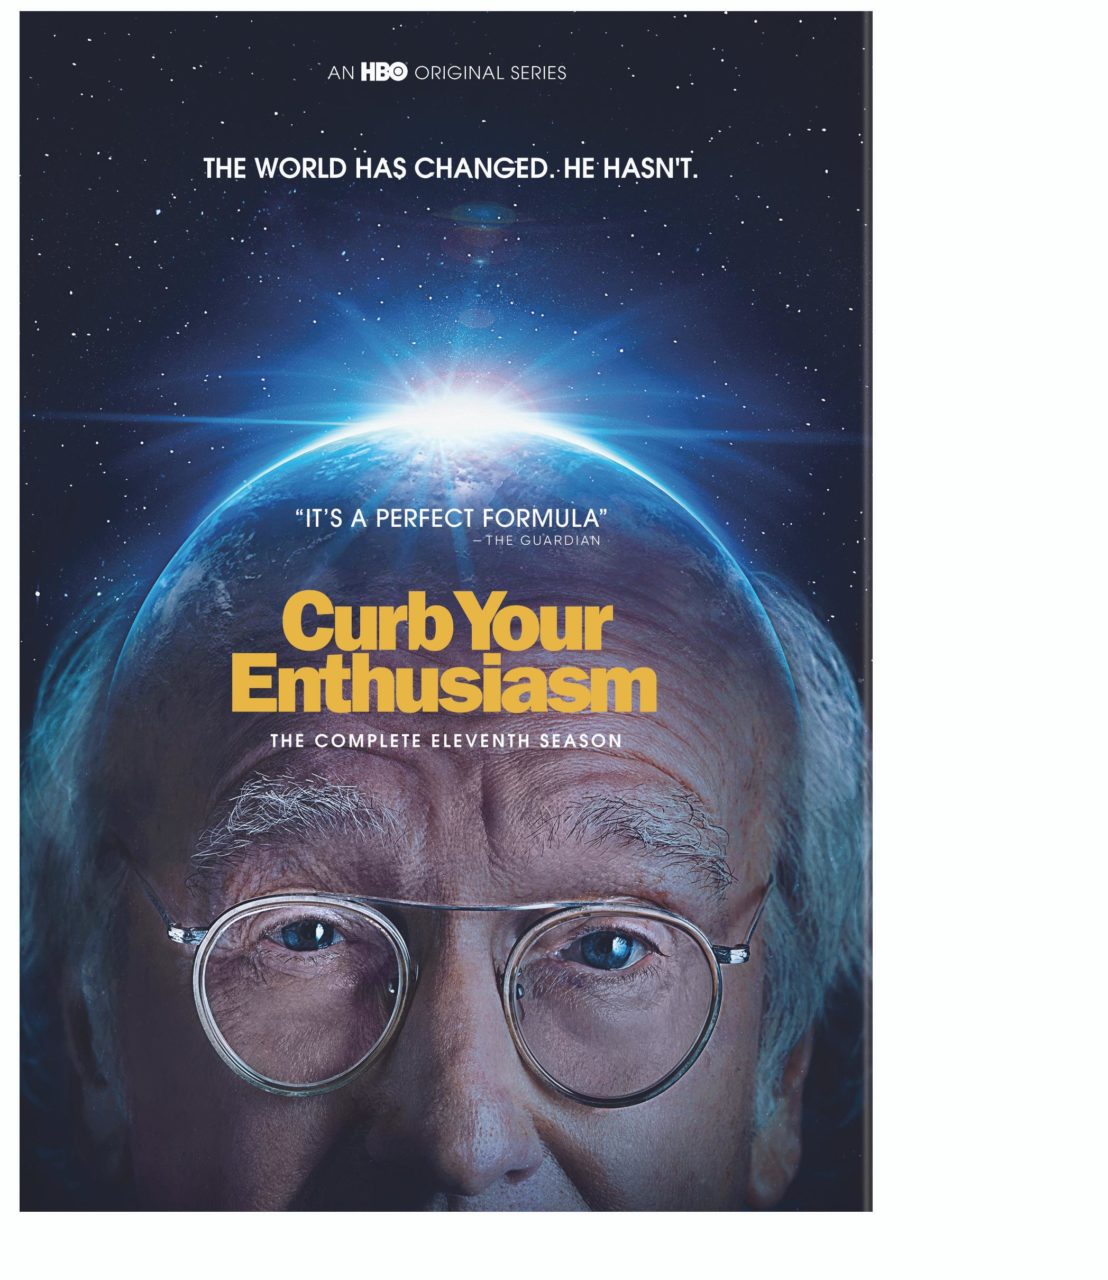 Curb Your Enthusiasm: The Complete Eleventh Season DVD cover (Warner Bros. Home Entertainment)